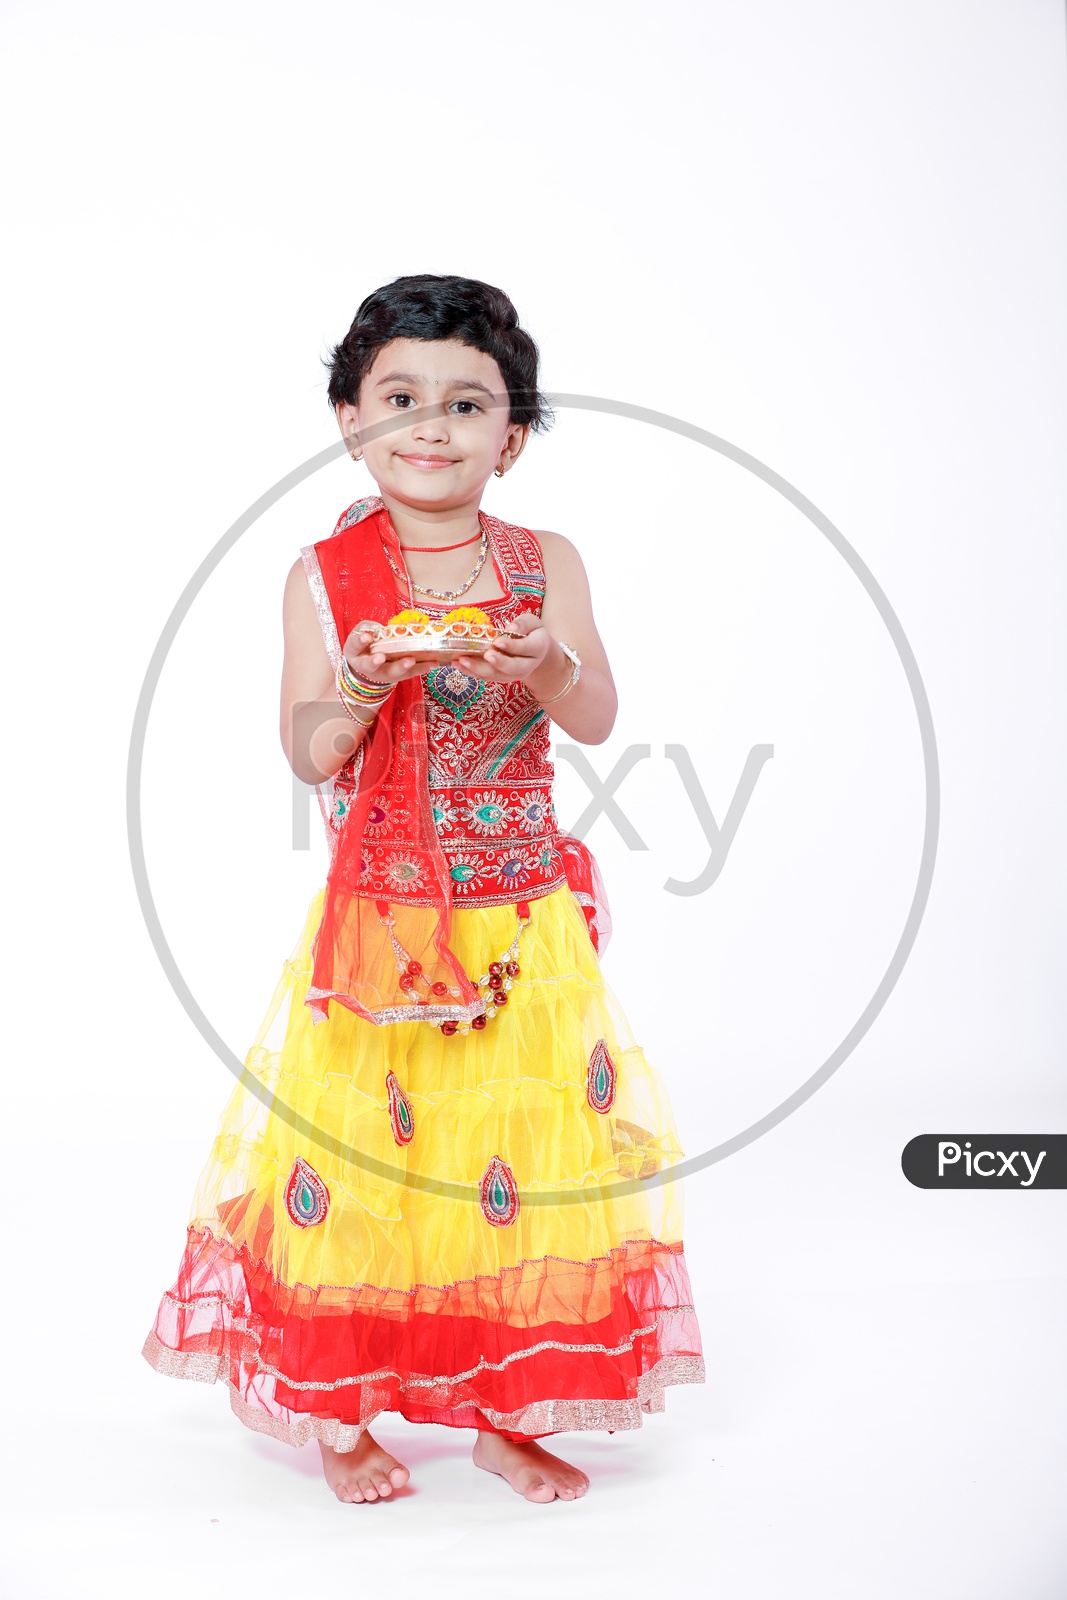 Indian Girl Child  With Puja Basket on a Isolated White Background with a Smiling Face